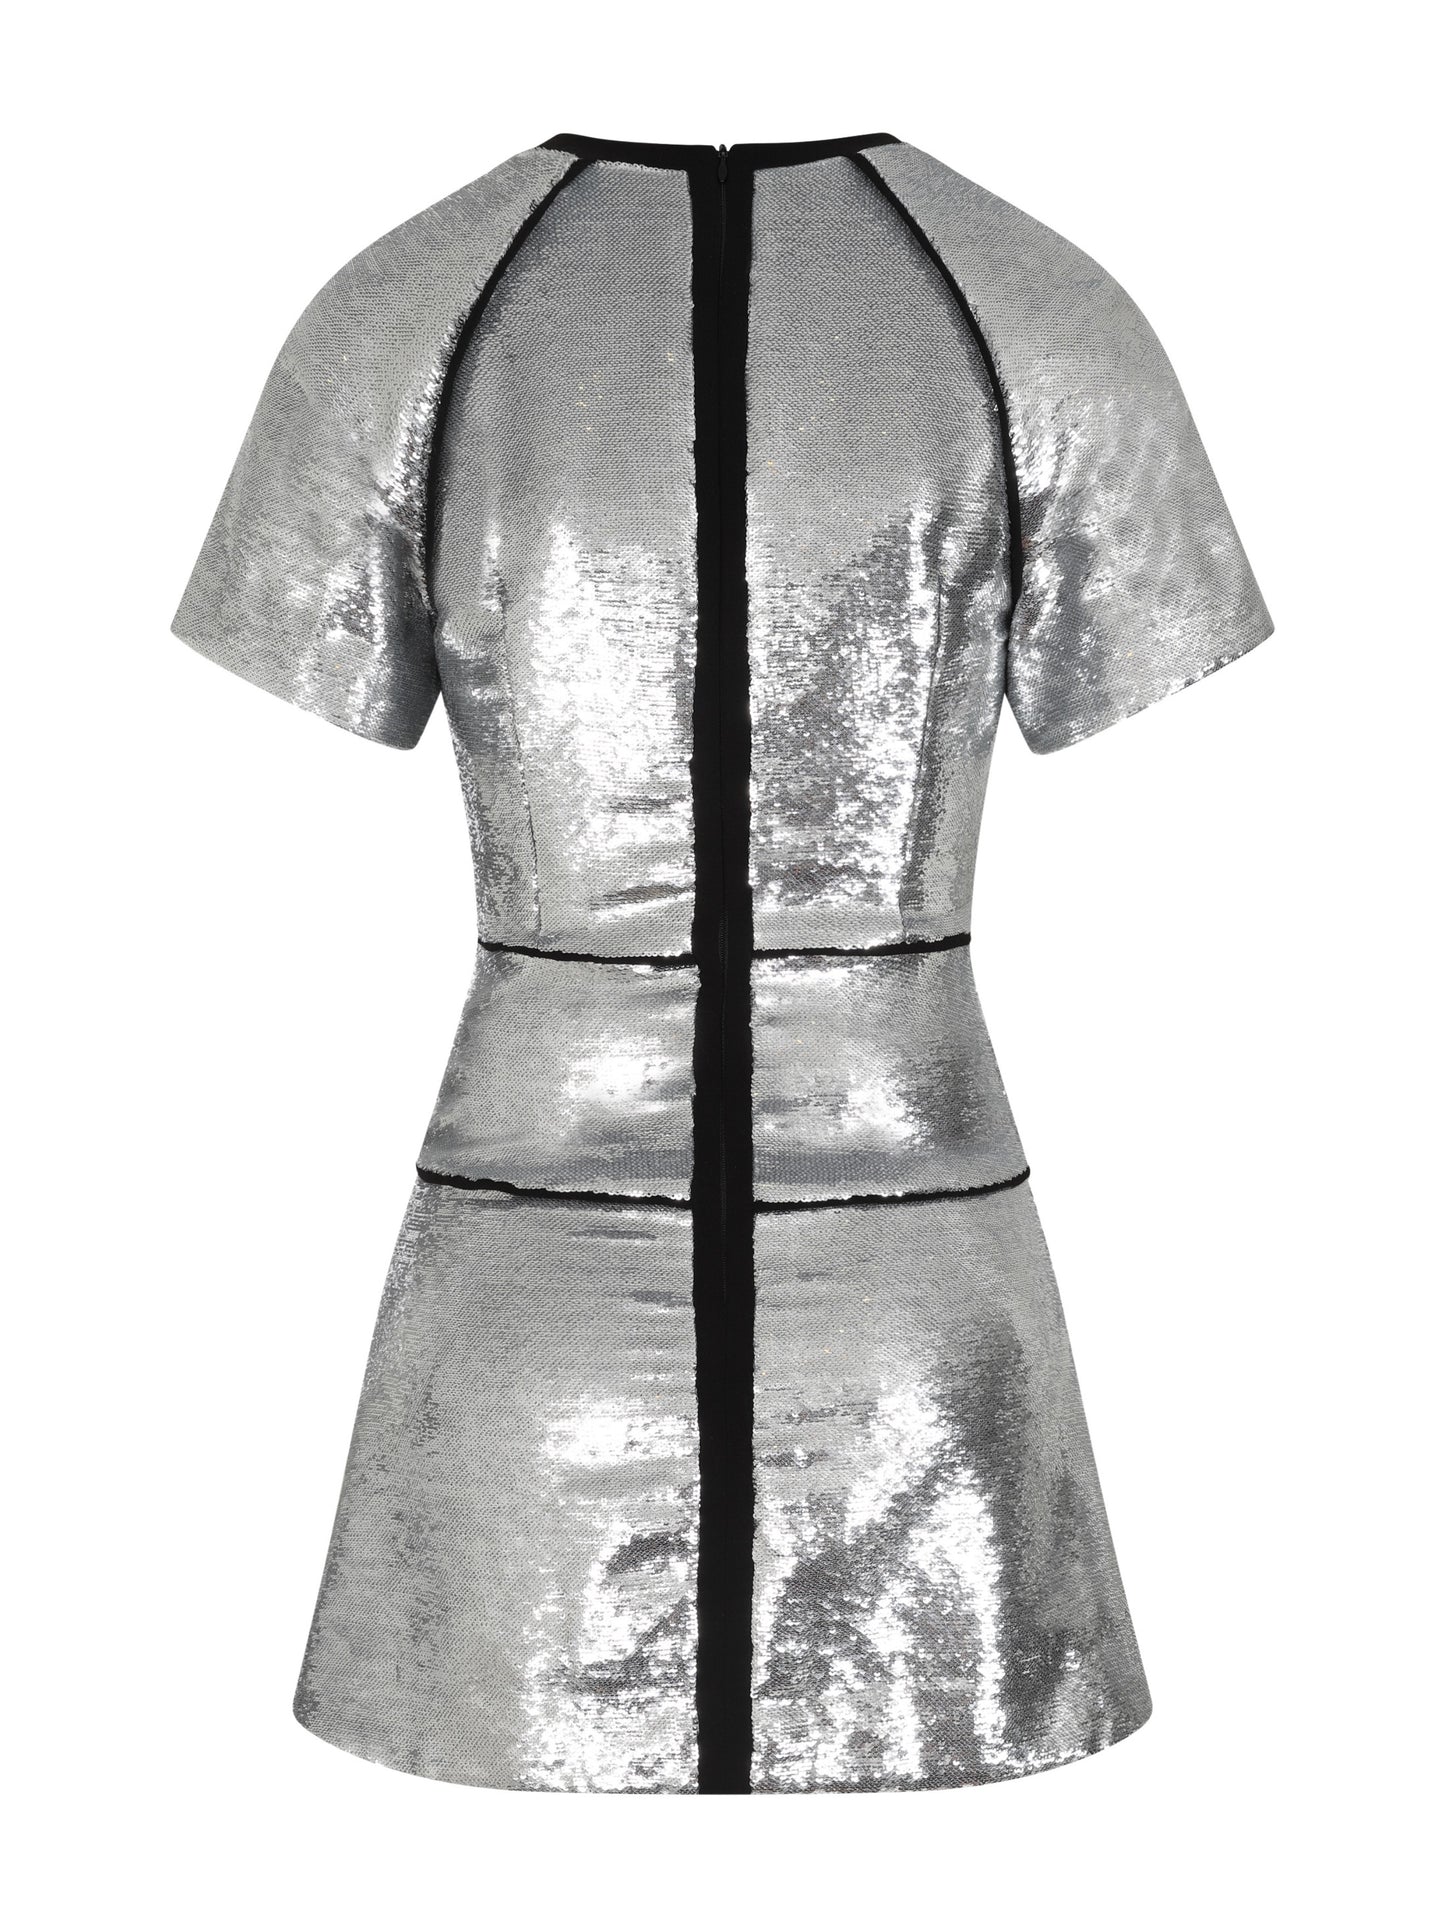 Silver Sequin Party Mini dress With Short Sleeves and Black Trims